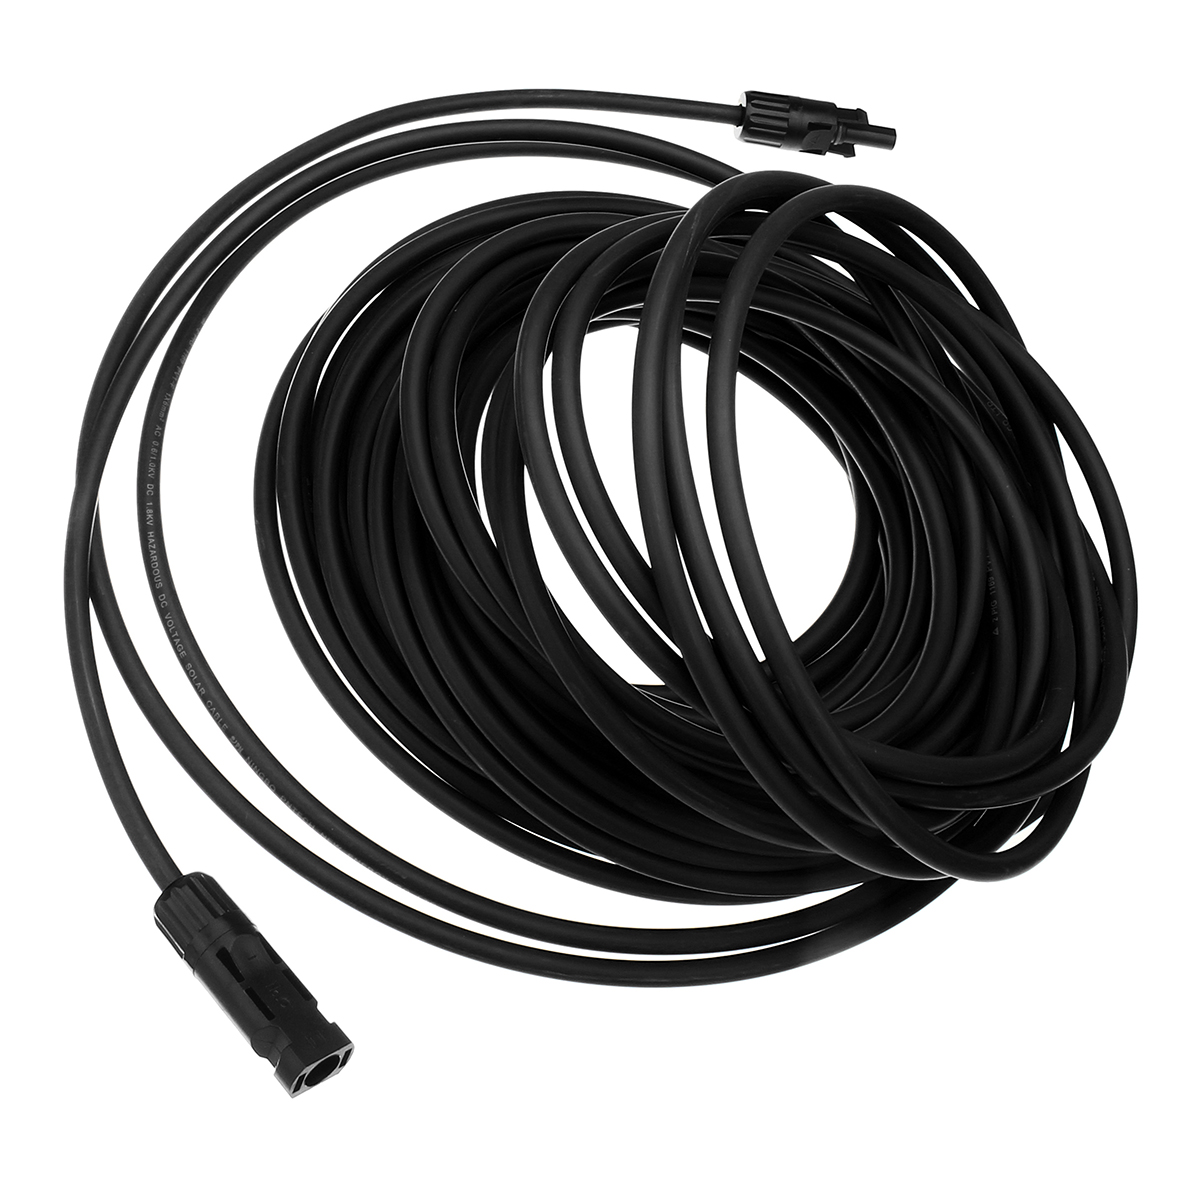 10-AWG-10-Meter-Solar-Panel-Extension-Cable-Wire-BlackRed-with-MC4-Connectors-1338696-5